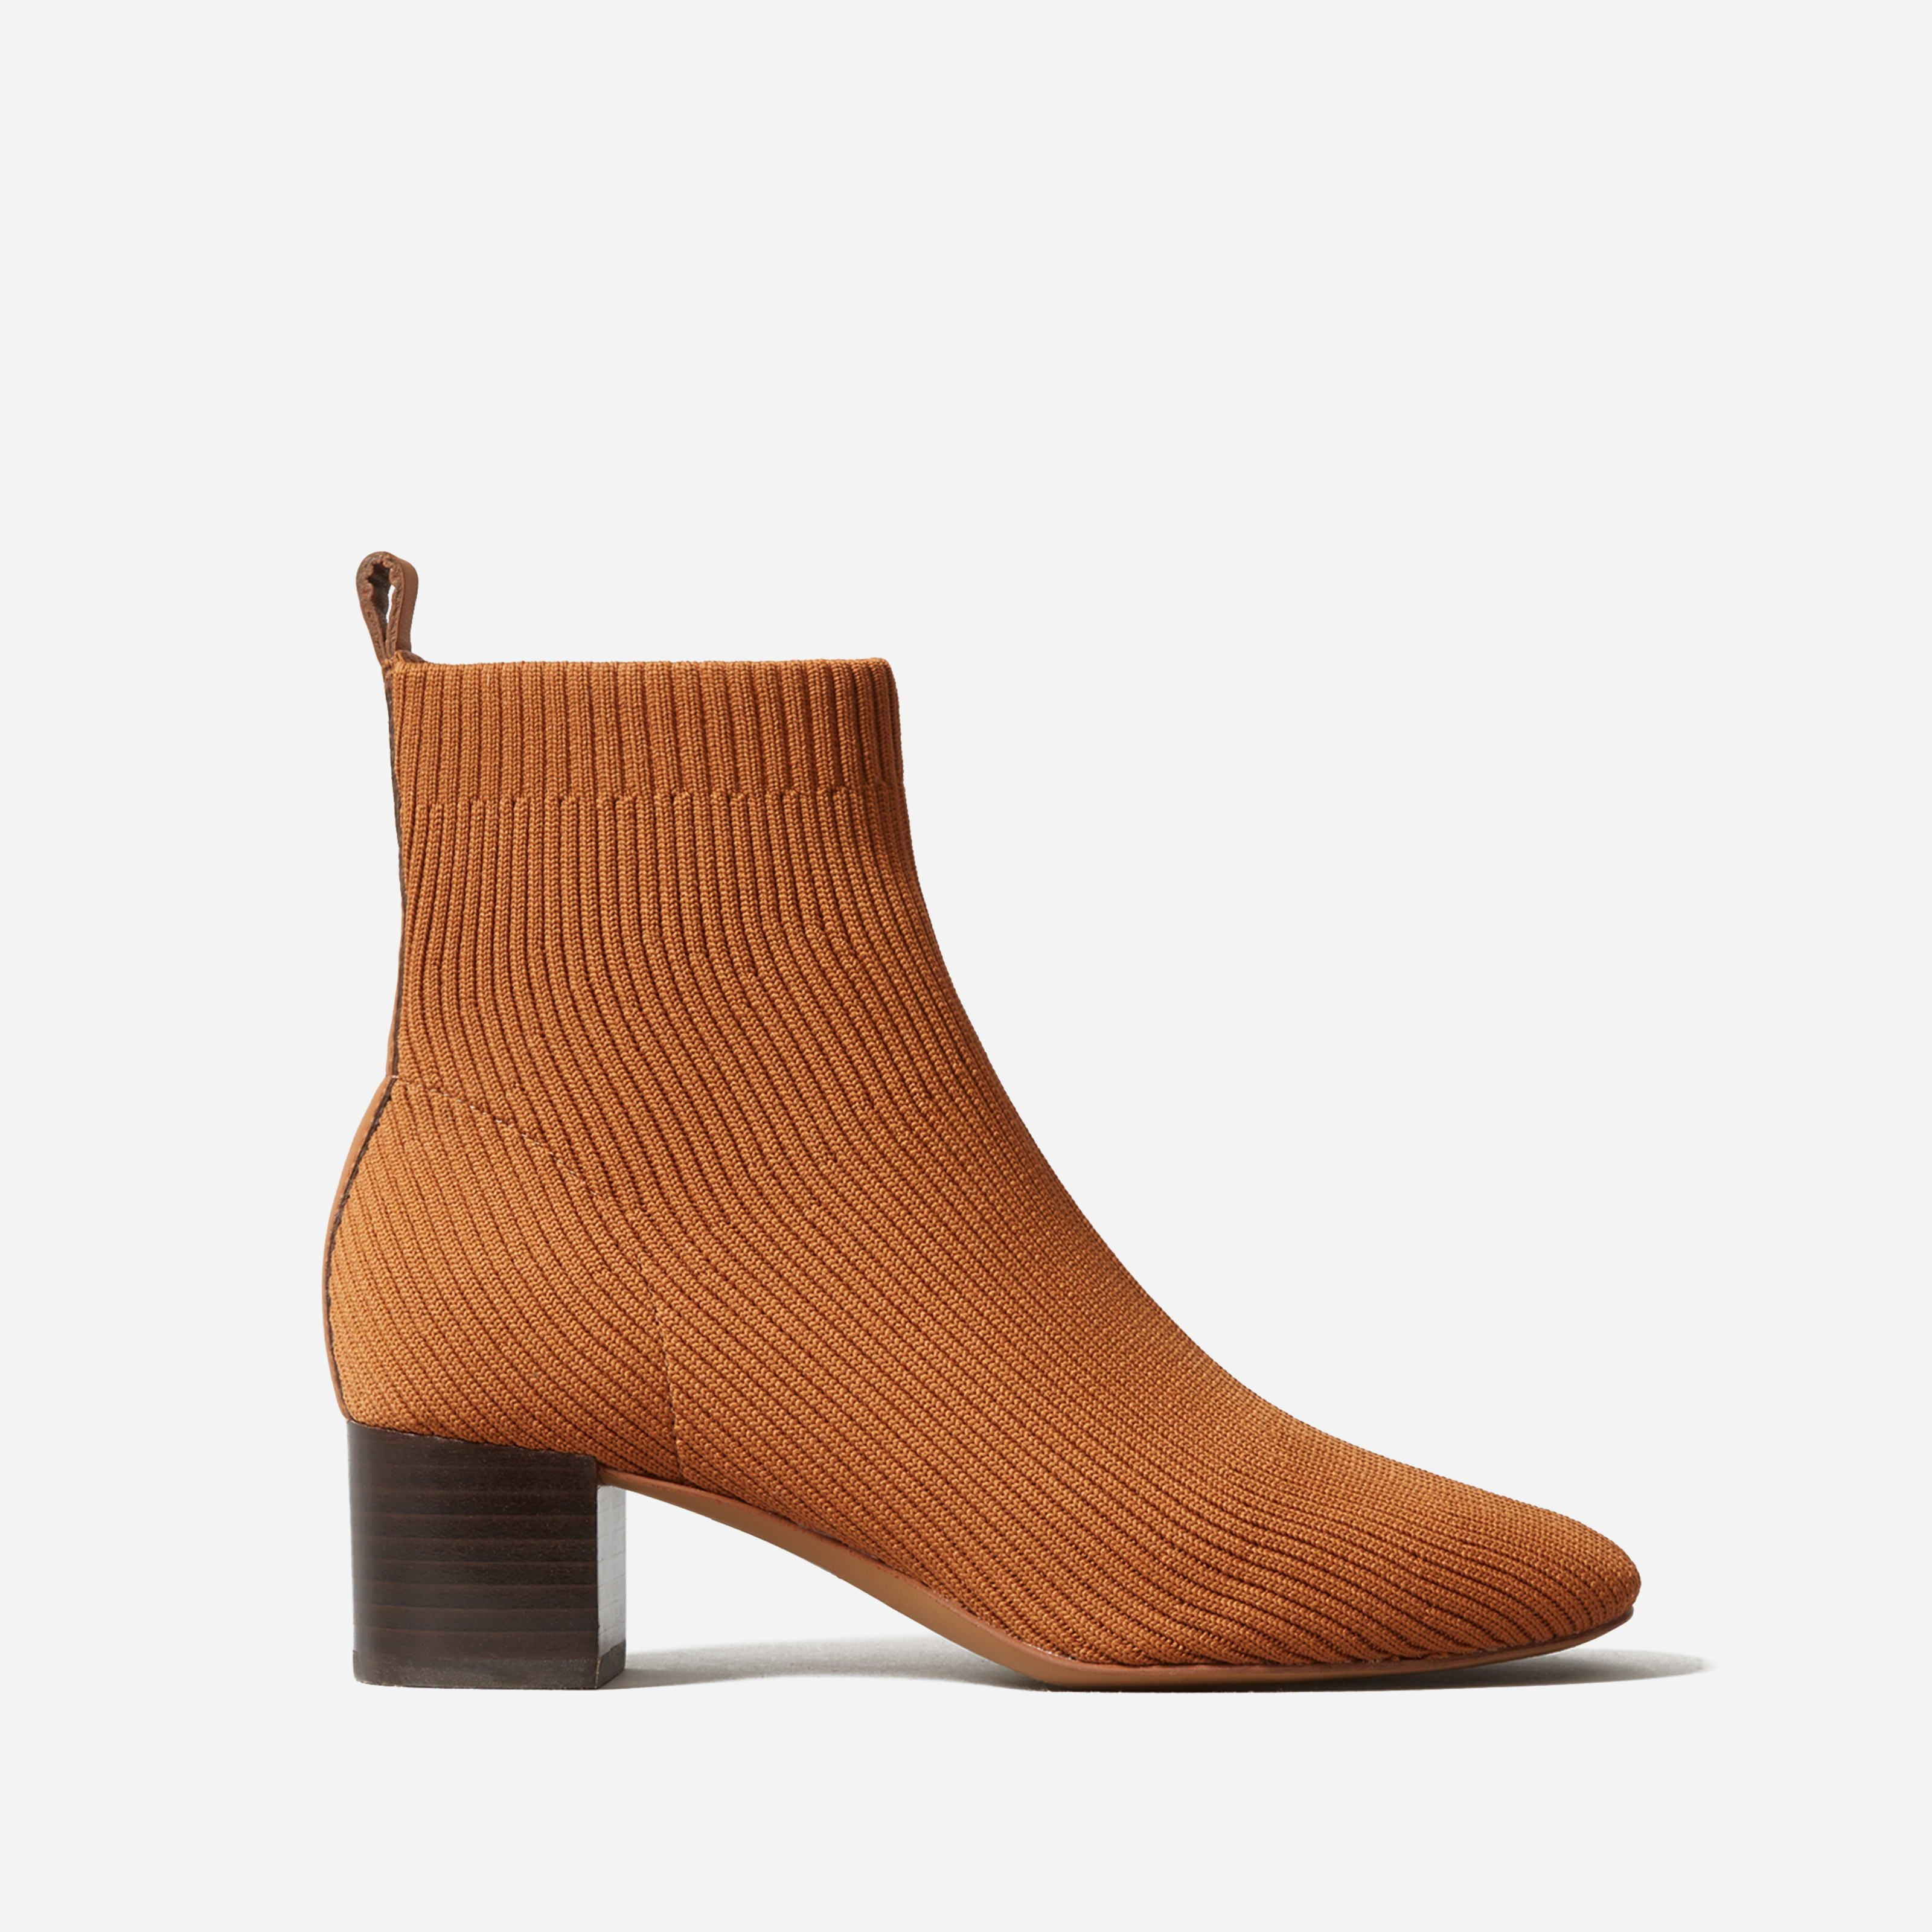 Women's Glove Boot by Everlane in Toffee, Size 10 | Everlane